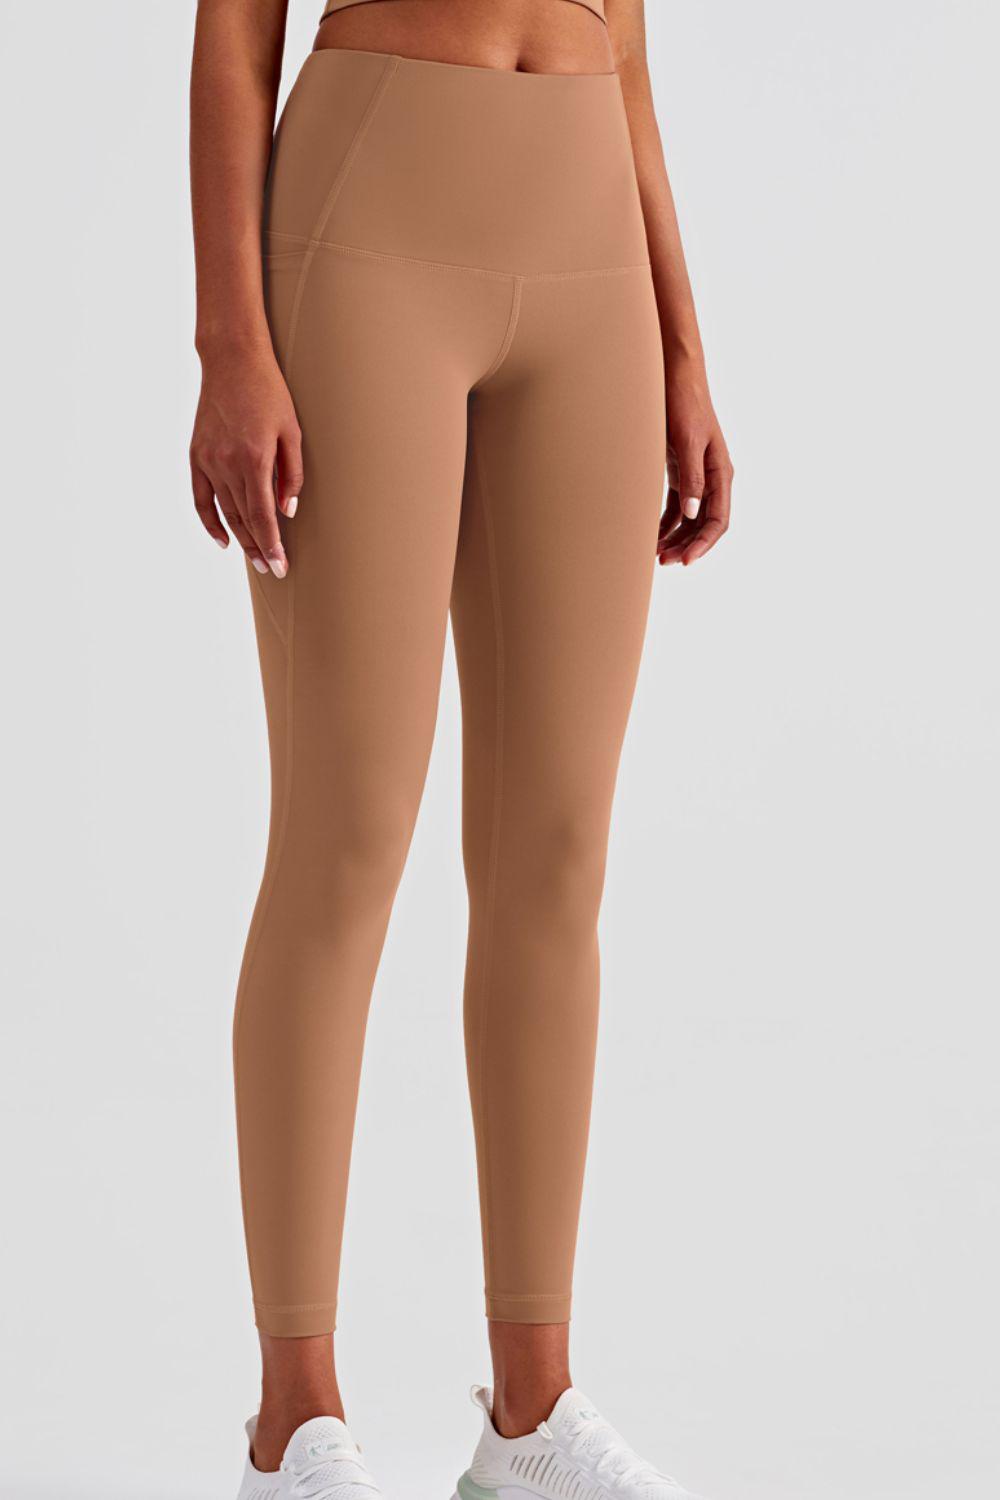 Wide Waistband Sports Leggings with Side Pockets-BOTTOM SIZES SMALL MEDIUM LARGE-[Adult]-[Female]-Caramel-S-2022 Online Blue Zone Planet